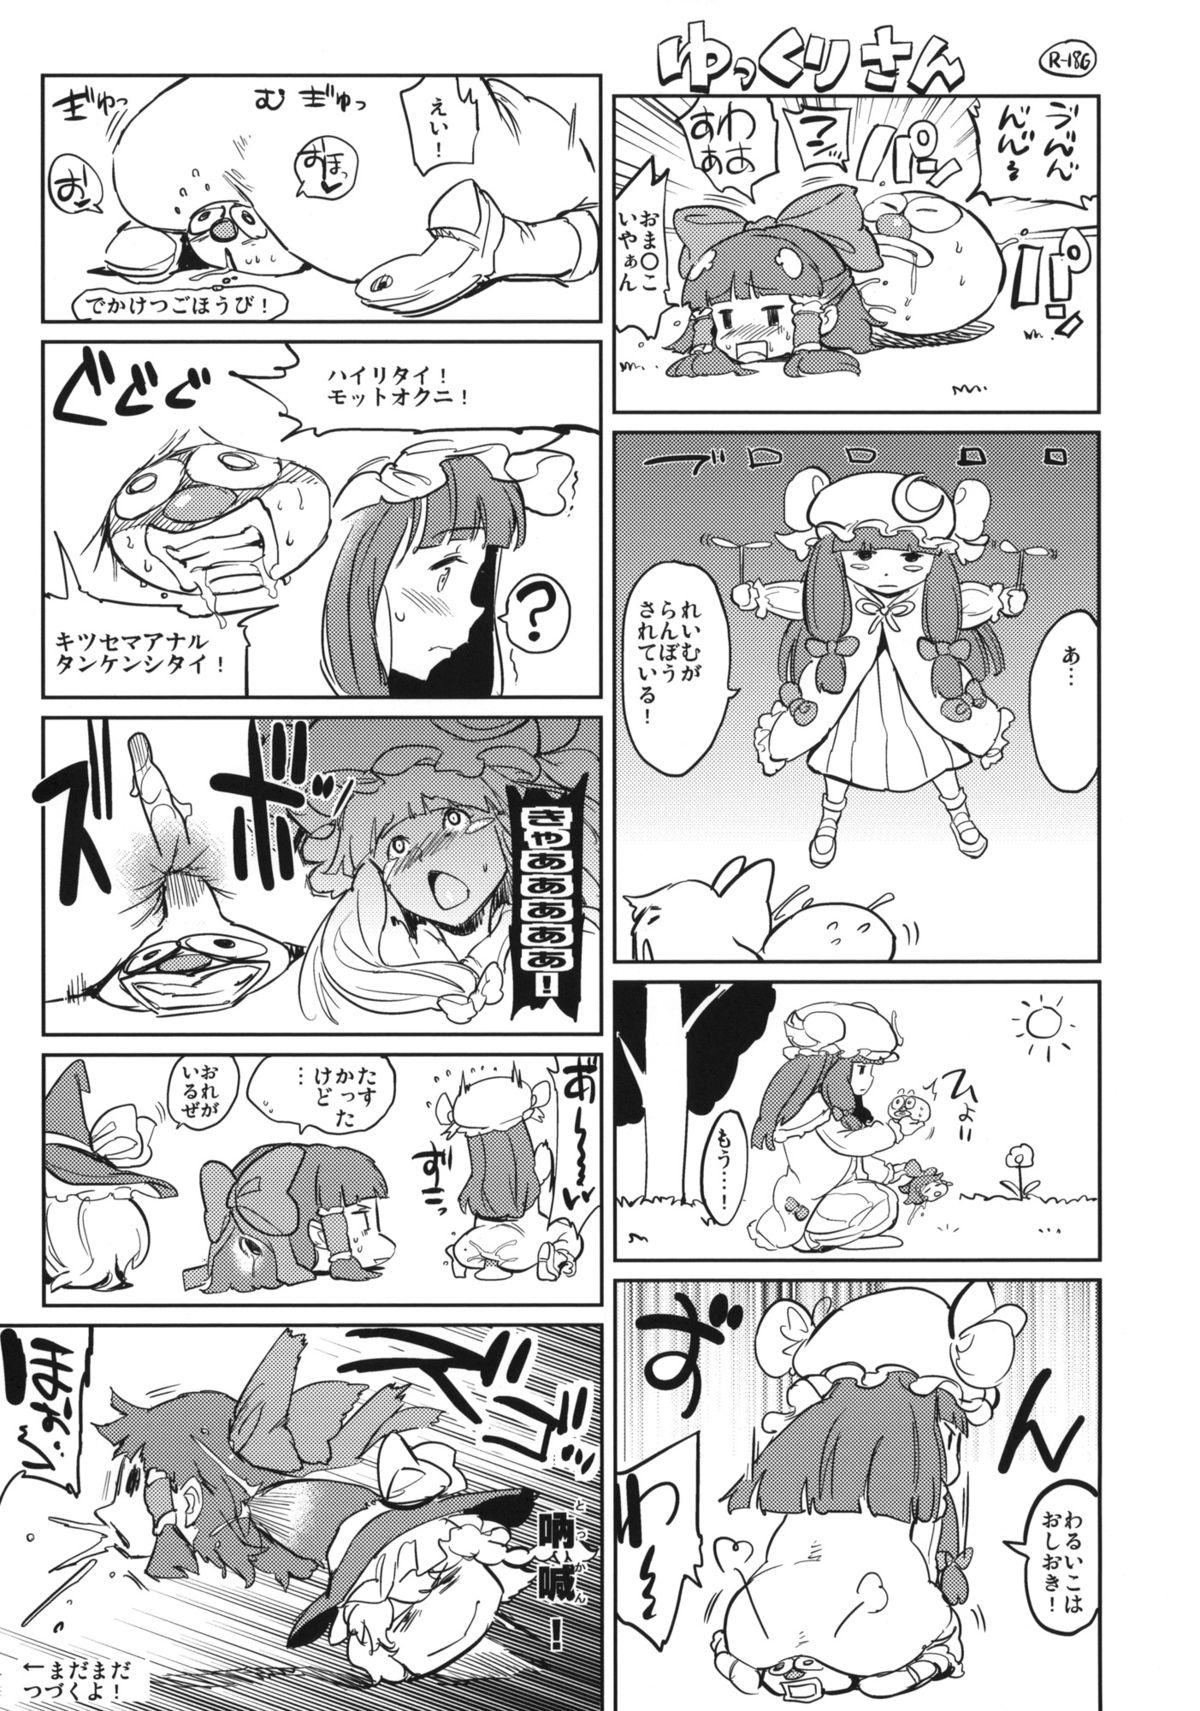 Gay SUBHUMAN - Touhou project Hardcore Porn - Page 21